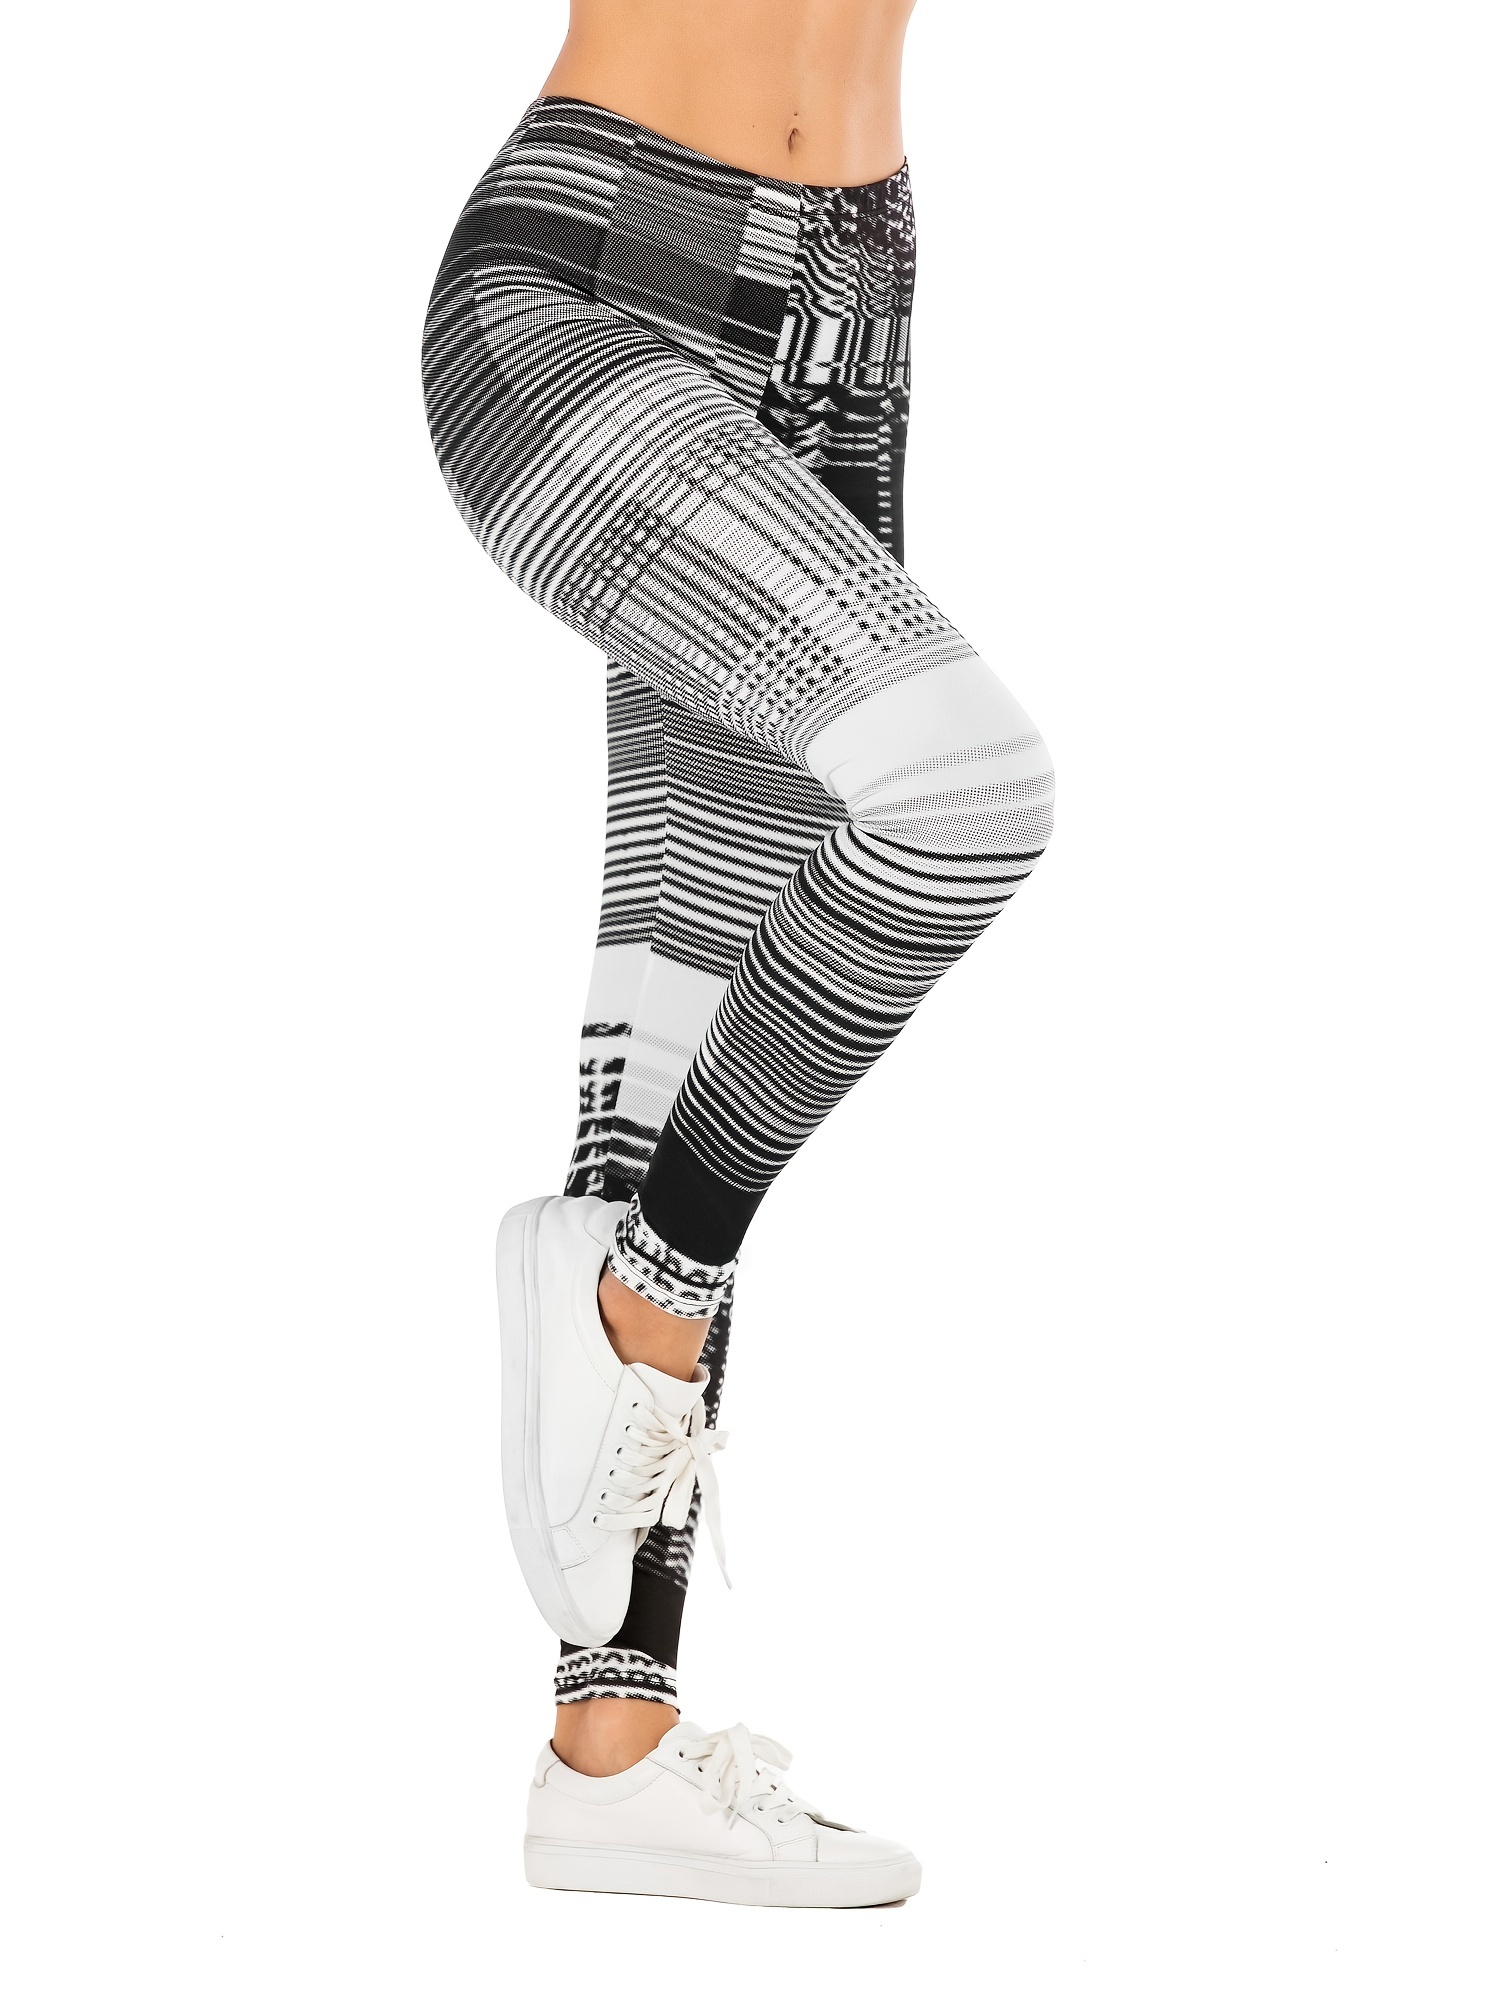 White and Black Grid legging  Popular leggings, Outfits with